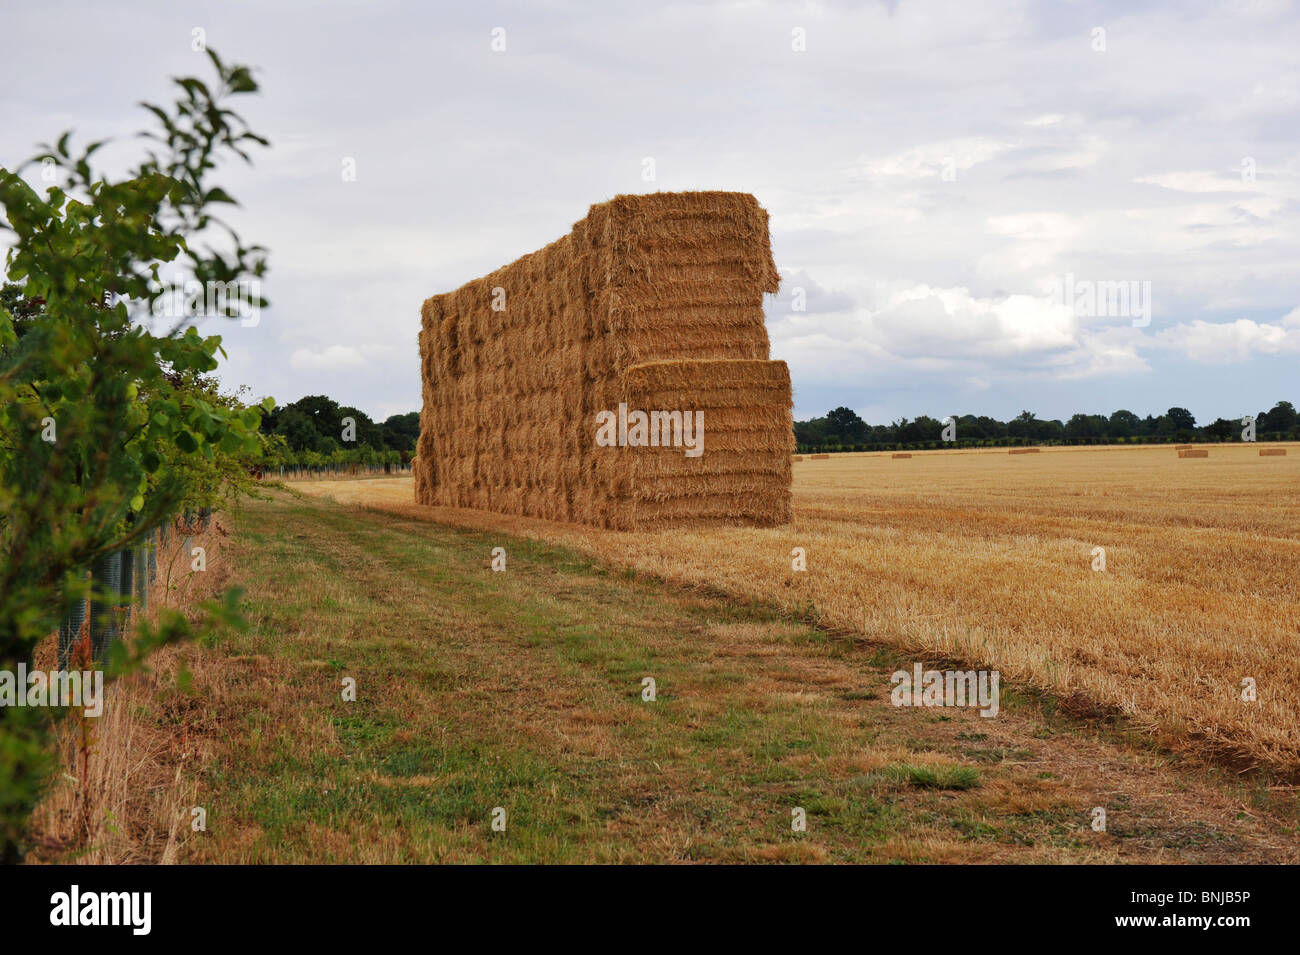 Giant hay stack gathered together after a harvest and awaiting collection for storage Stock Photo